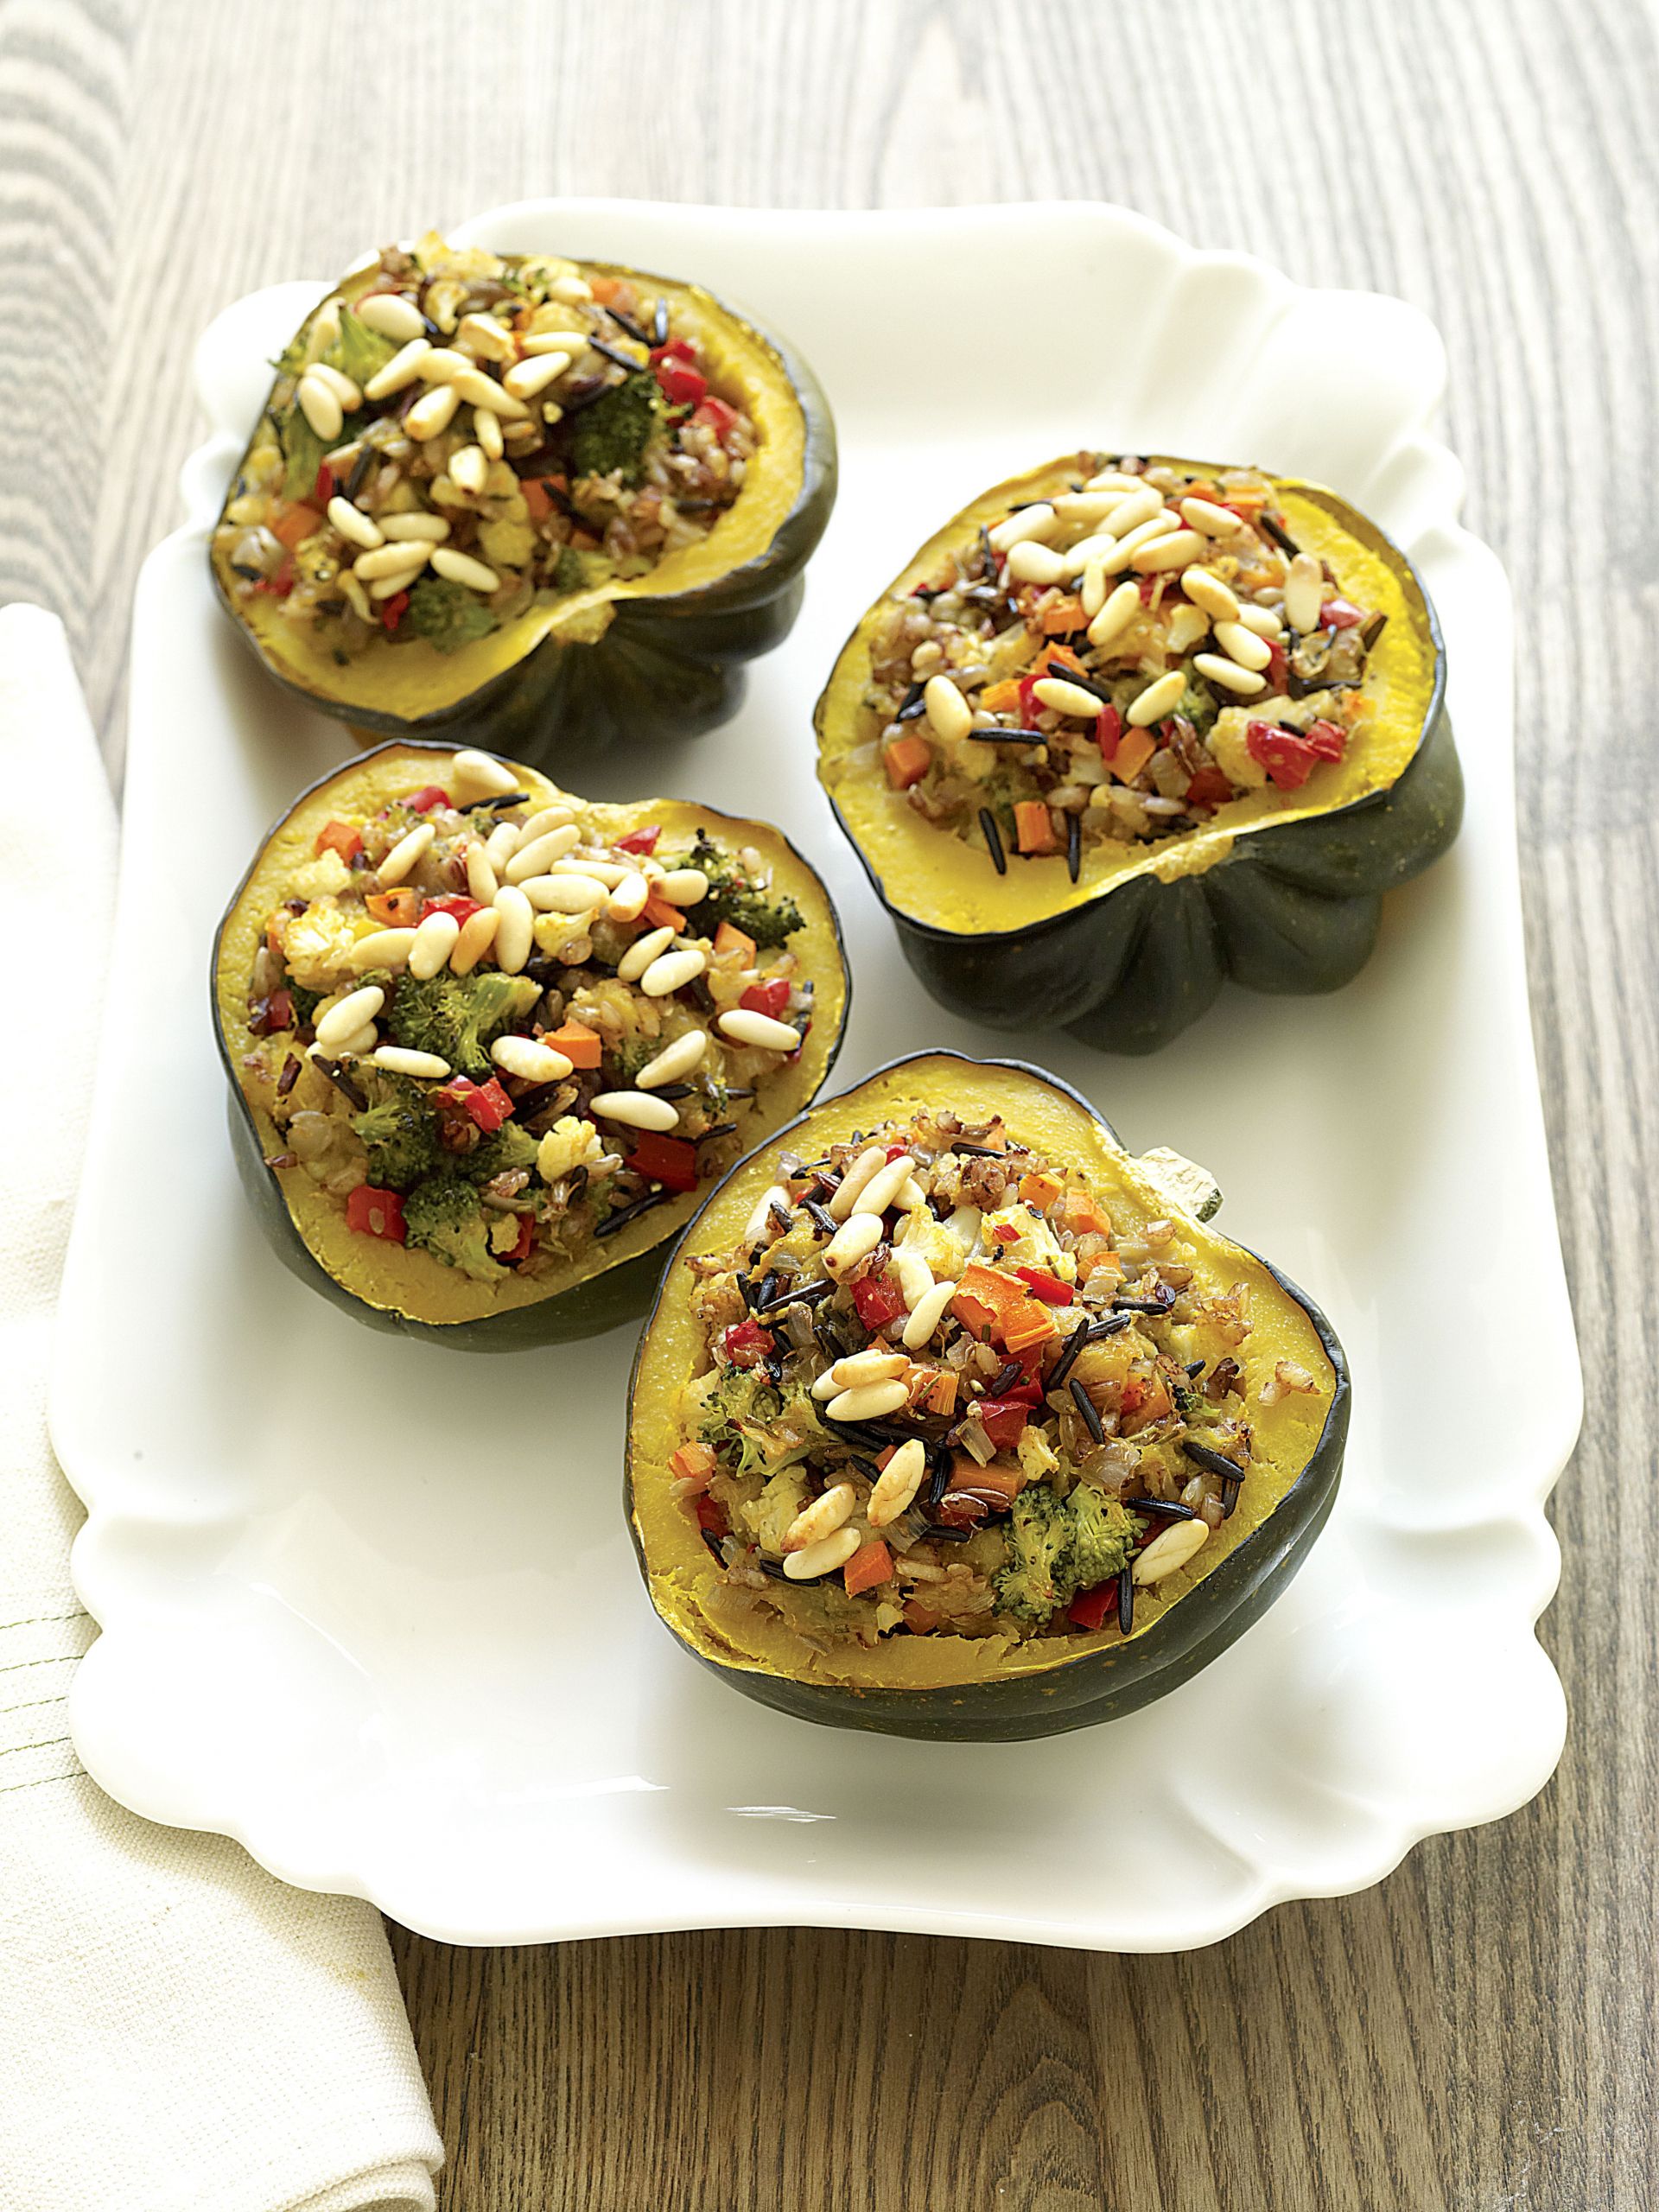 Plant Based Recipes Forks Over Knives
 Roasted Stuffed Winter Squash from the Forks Over Knives